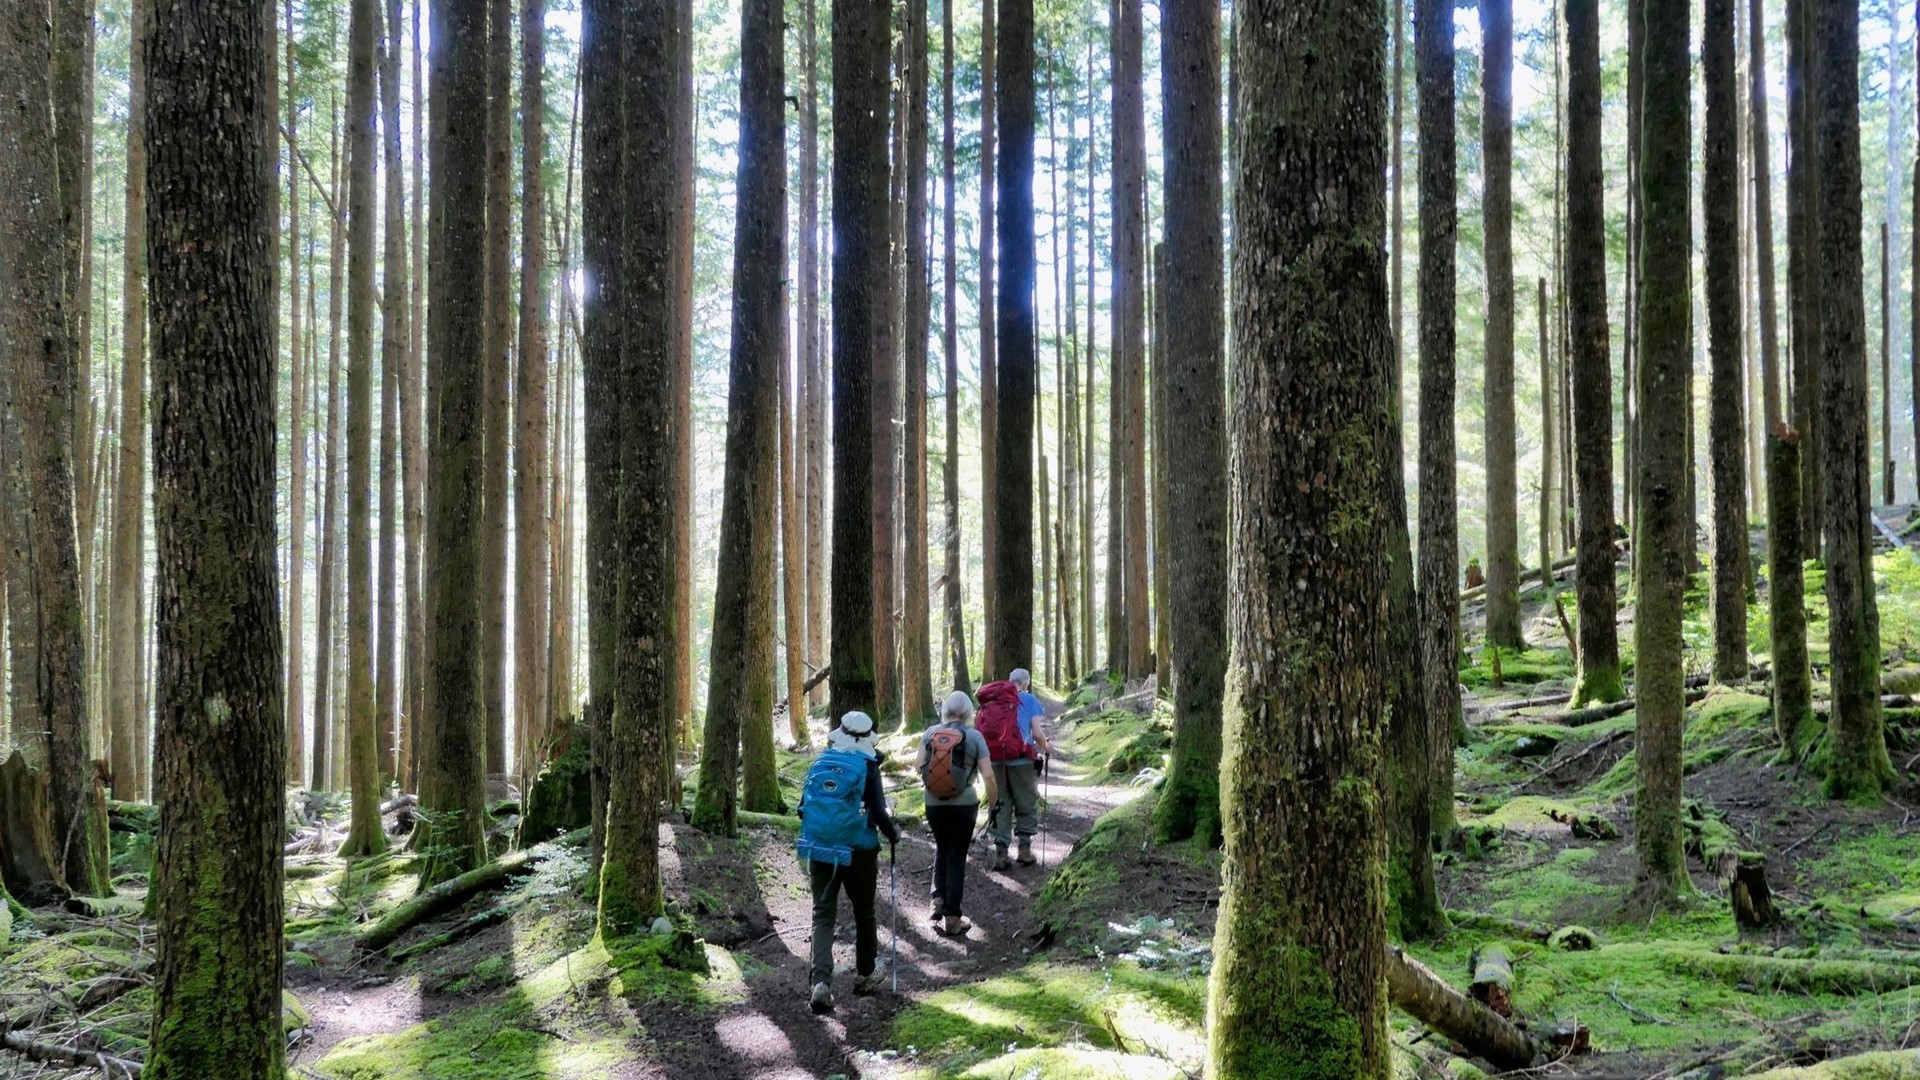 Teresa Hagerty, a Seattle outdoor guide, shares her recommendations for seniors who are looking to explore the fantastic trails Western Washington has to offer.